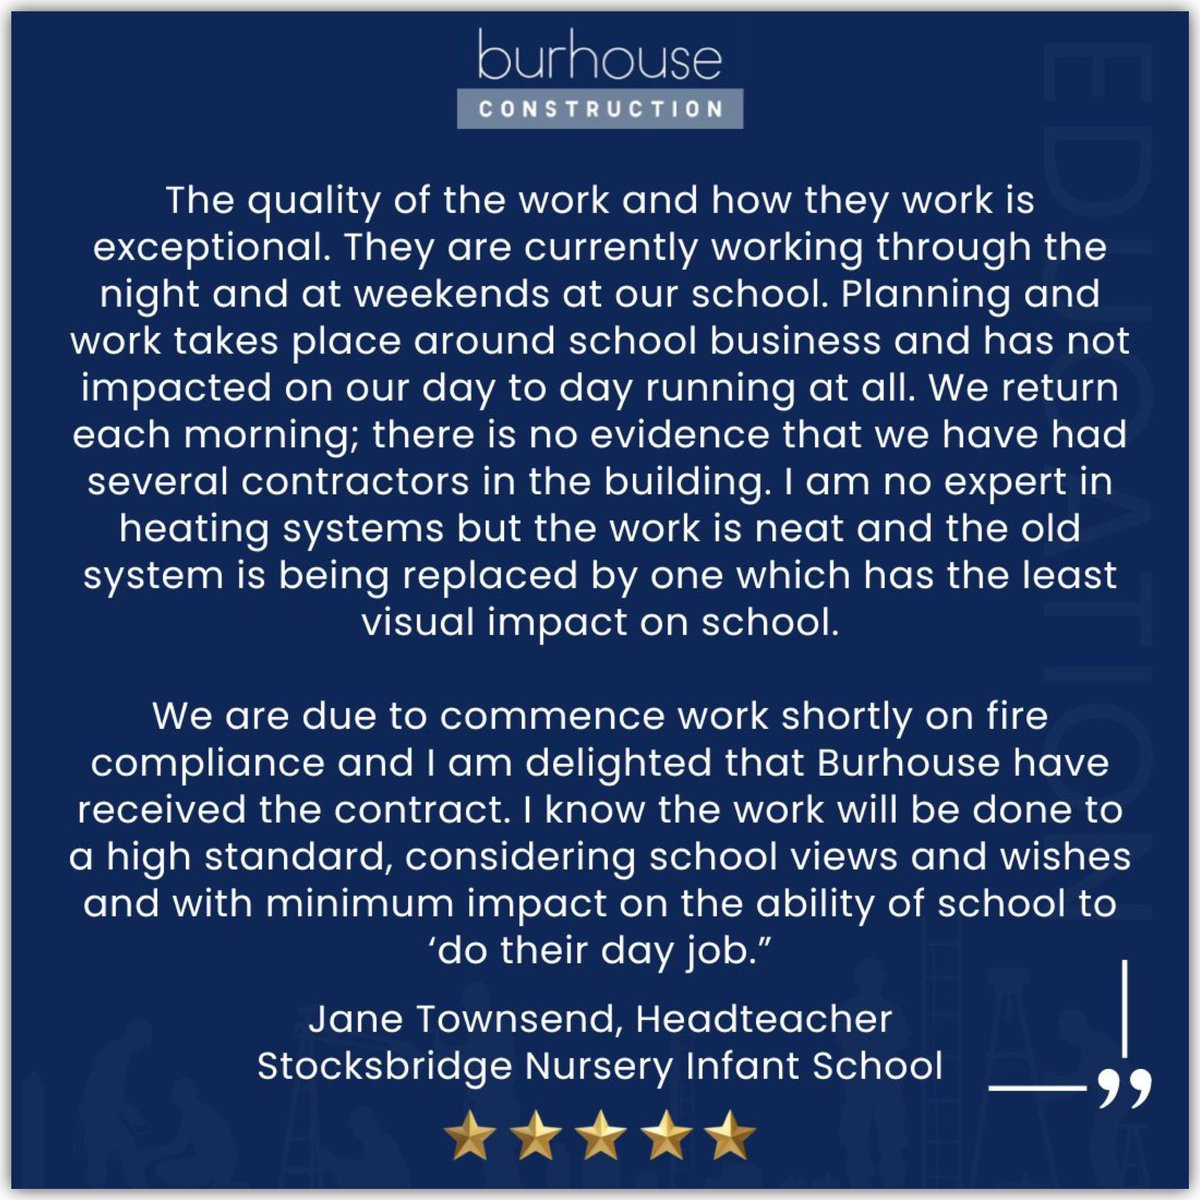 Thrilled to receive this glowing feedback from an ongoing project within a school  ⭐️⭐️⭐️⭐️⭐️

#burhouseconstruction #constructionwithaconscience 
#constructioncompany
#commercialconstruction
#renovationideas
#modernarchitecture #doncasterisgreat #yorkshire #midlands